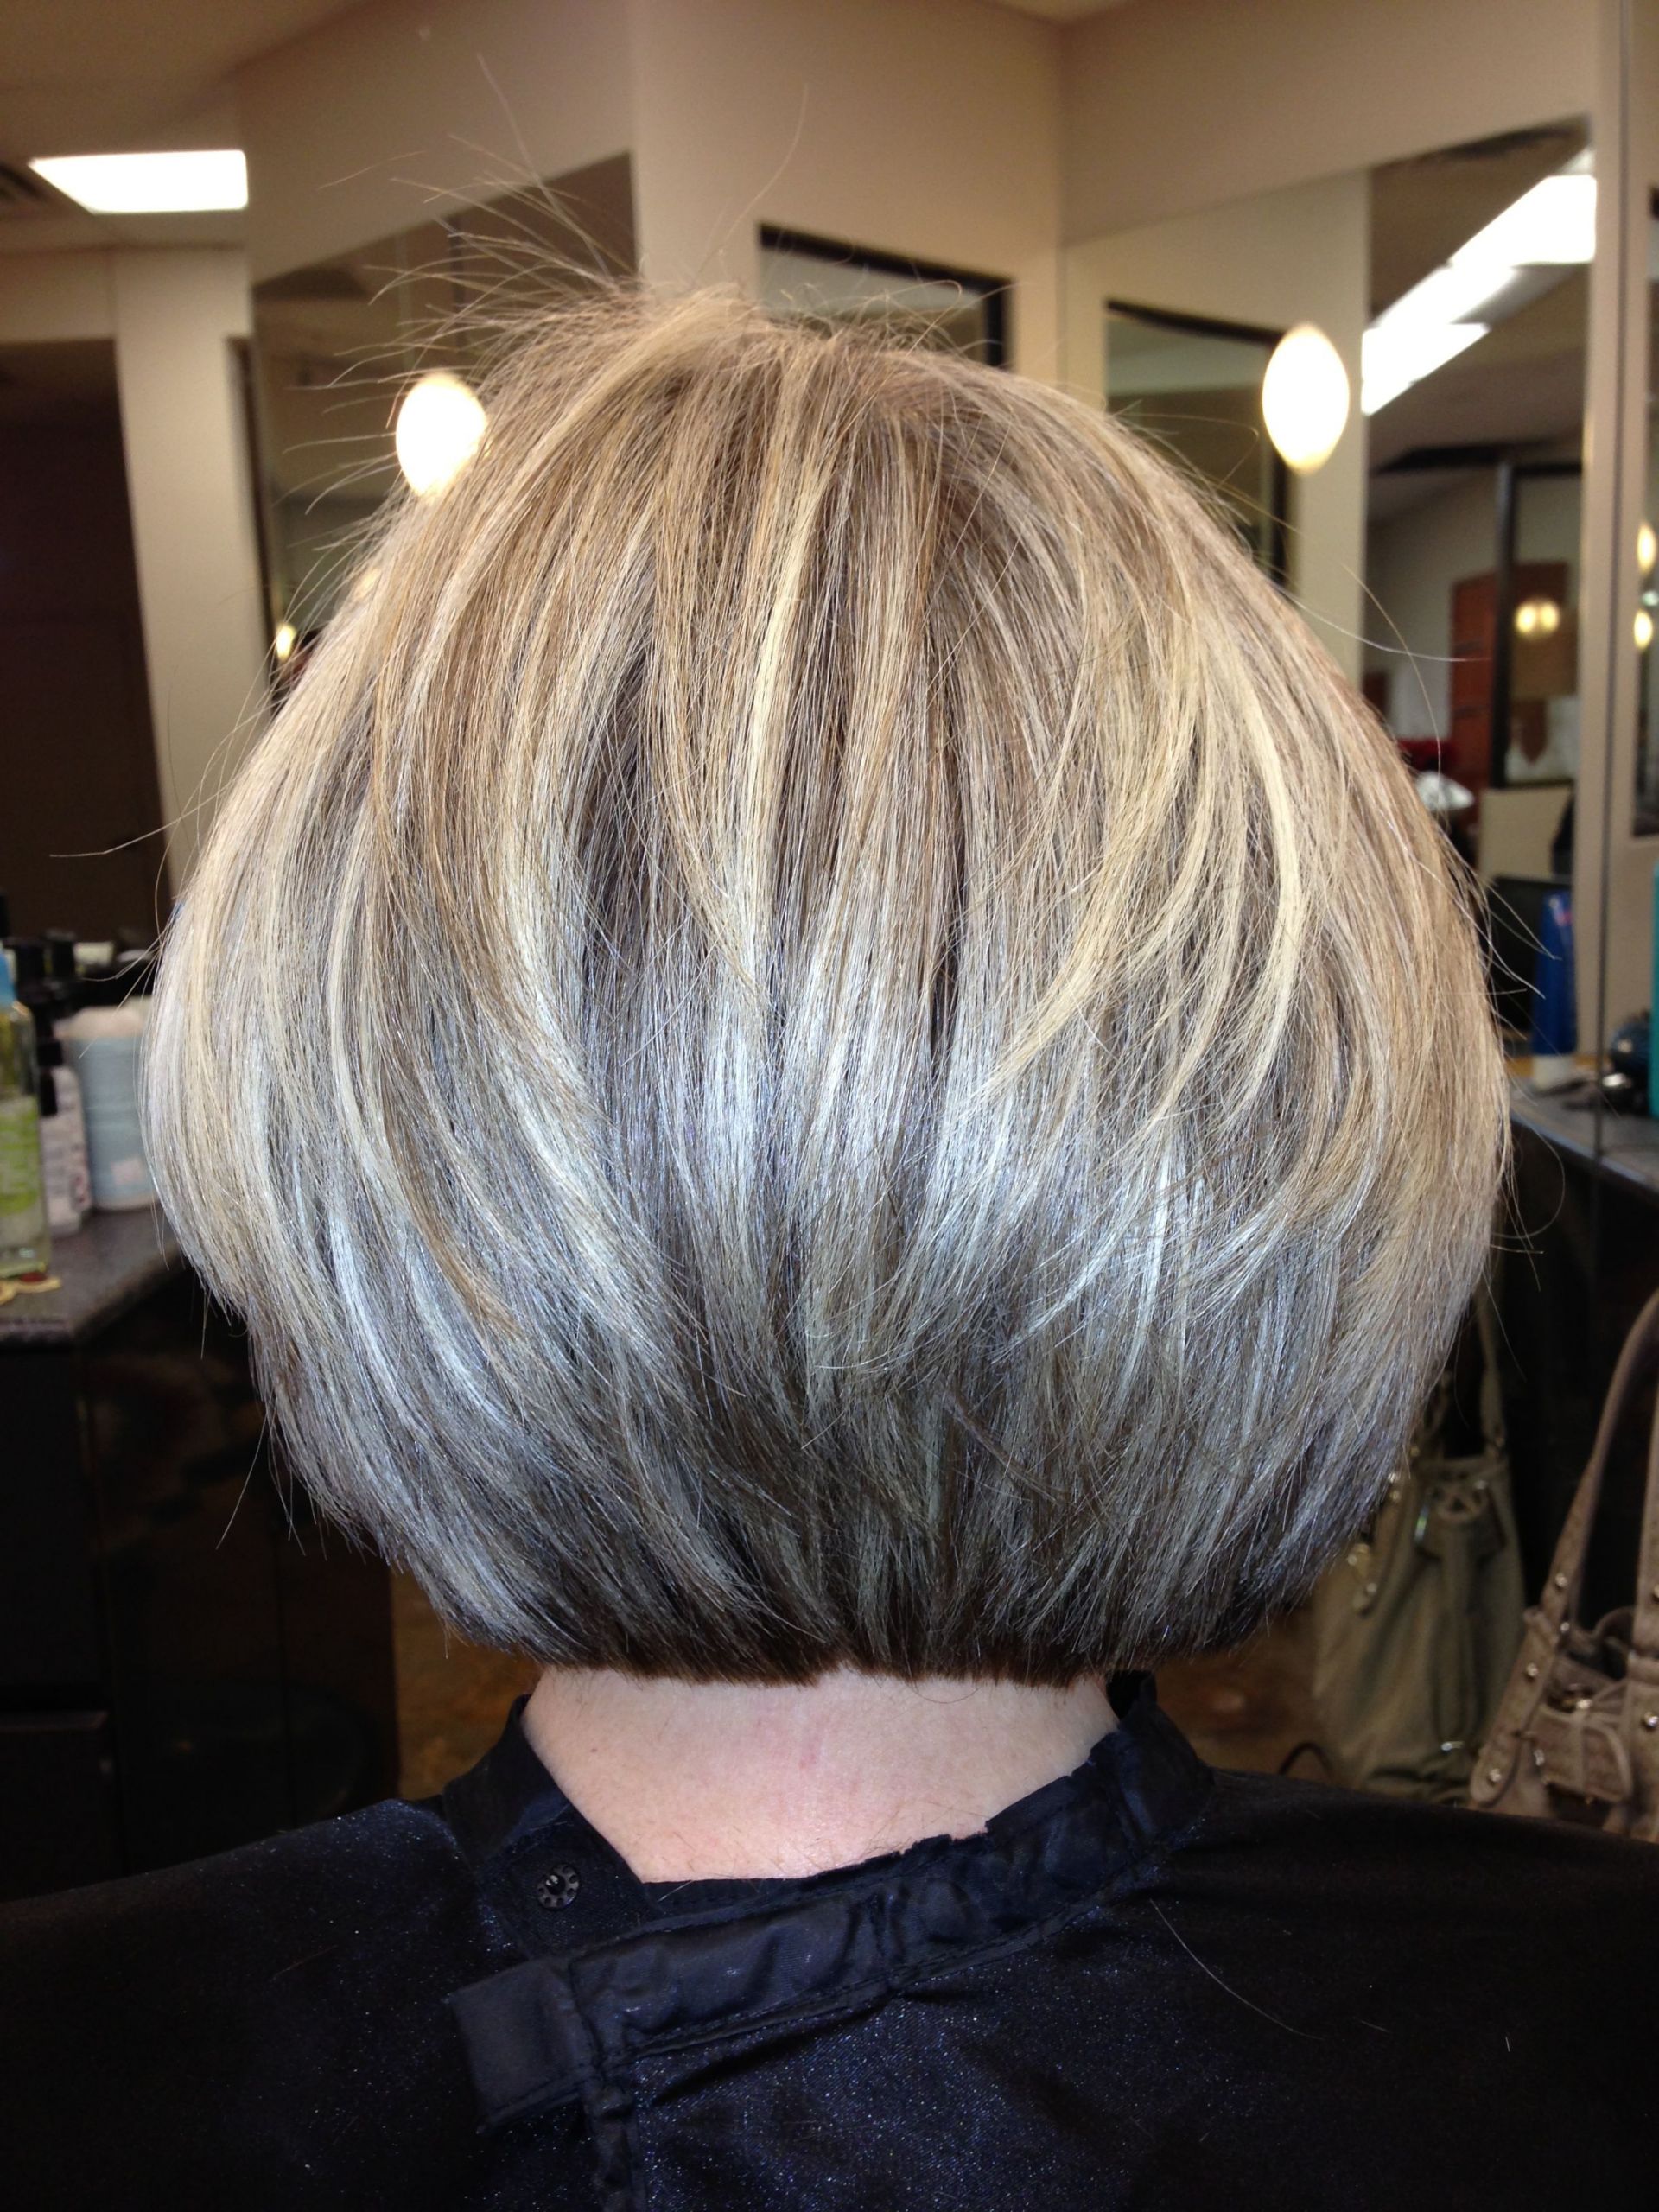 Blunt Cut Bob For Thick Hair
 Blunt yet layered texturized cut